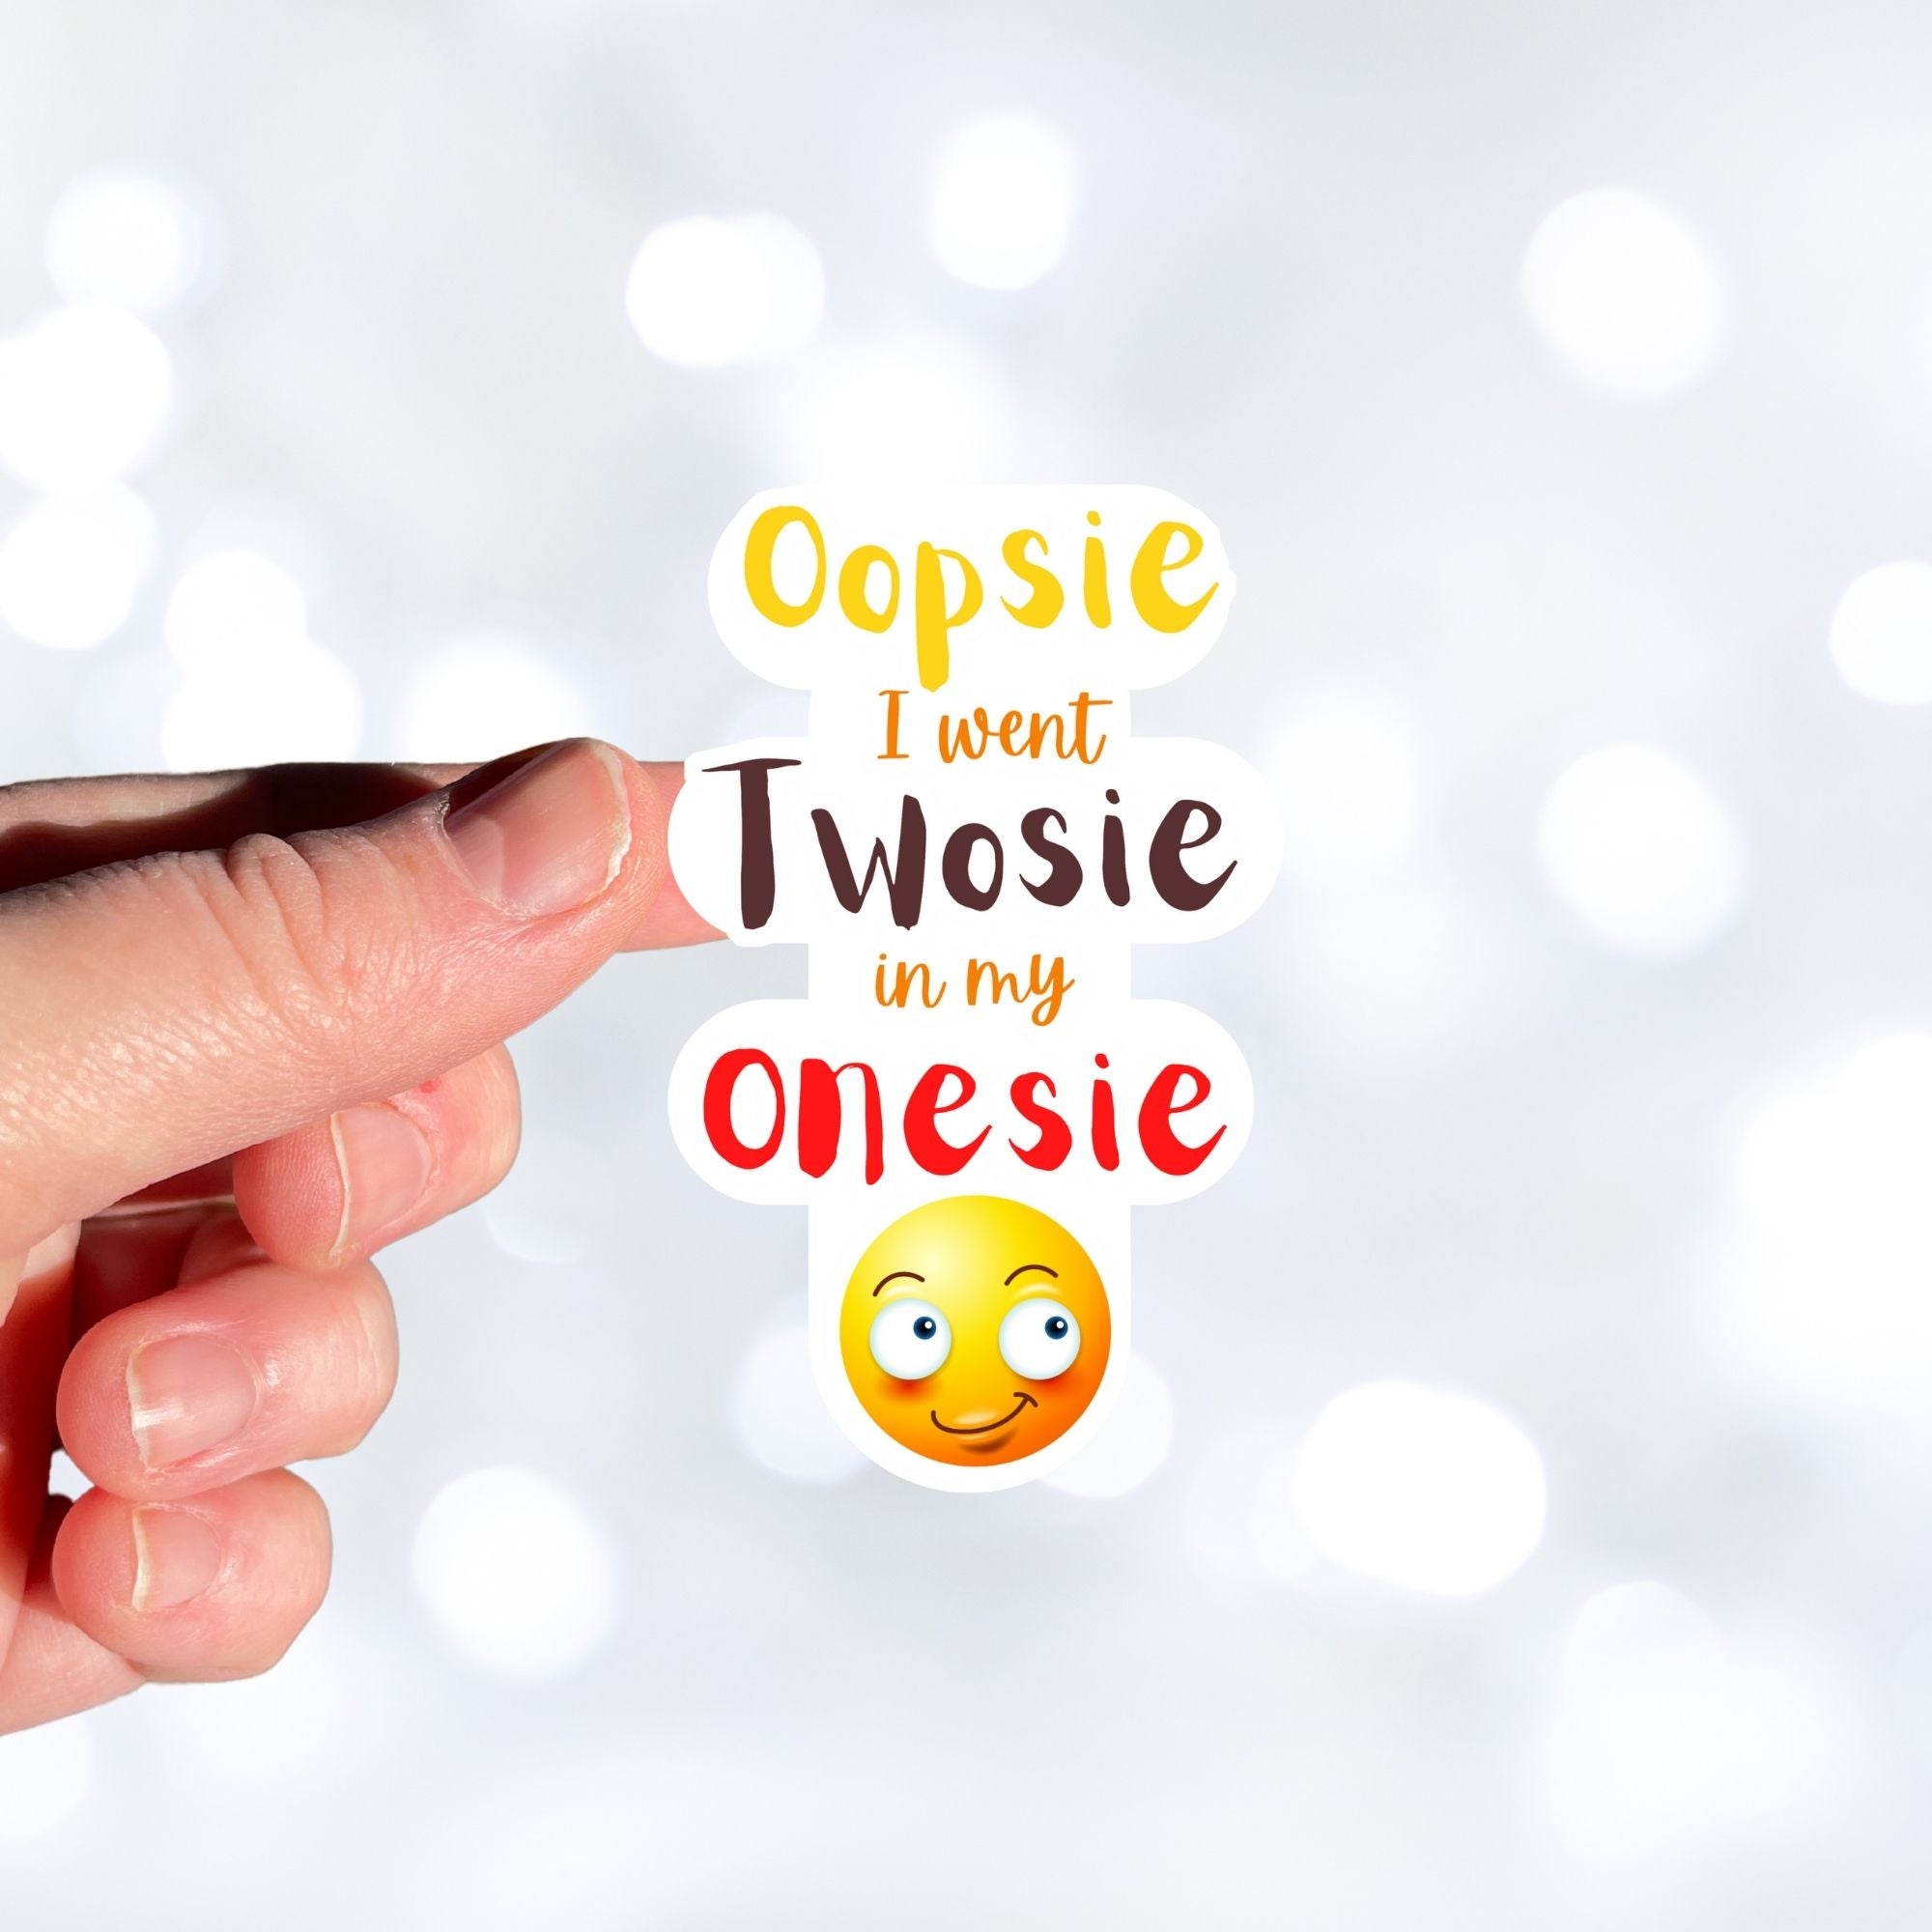 Oopsie, I went Twosie in my Onesie... Anyone who has had a baby knows that this happens! This makes a cute gift for people who are expecting, and you can pair it with one or more of our baby themed sticker sheets. This image shows a hand holding the Oopsie die-cut sticker.